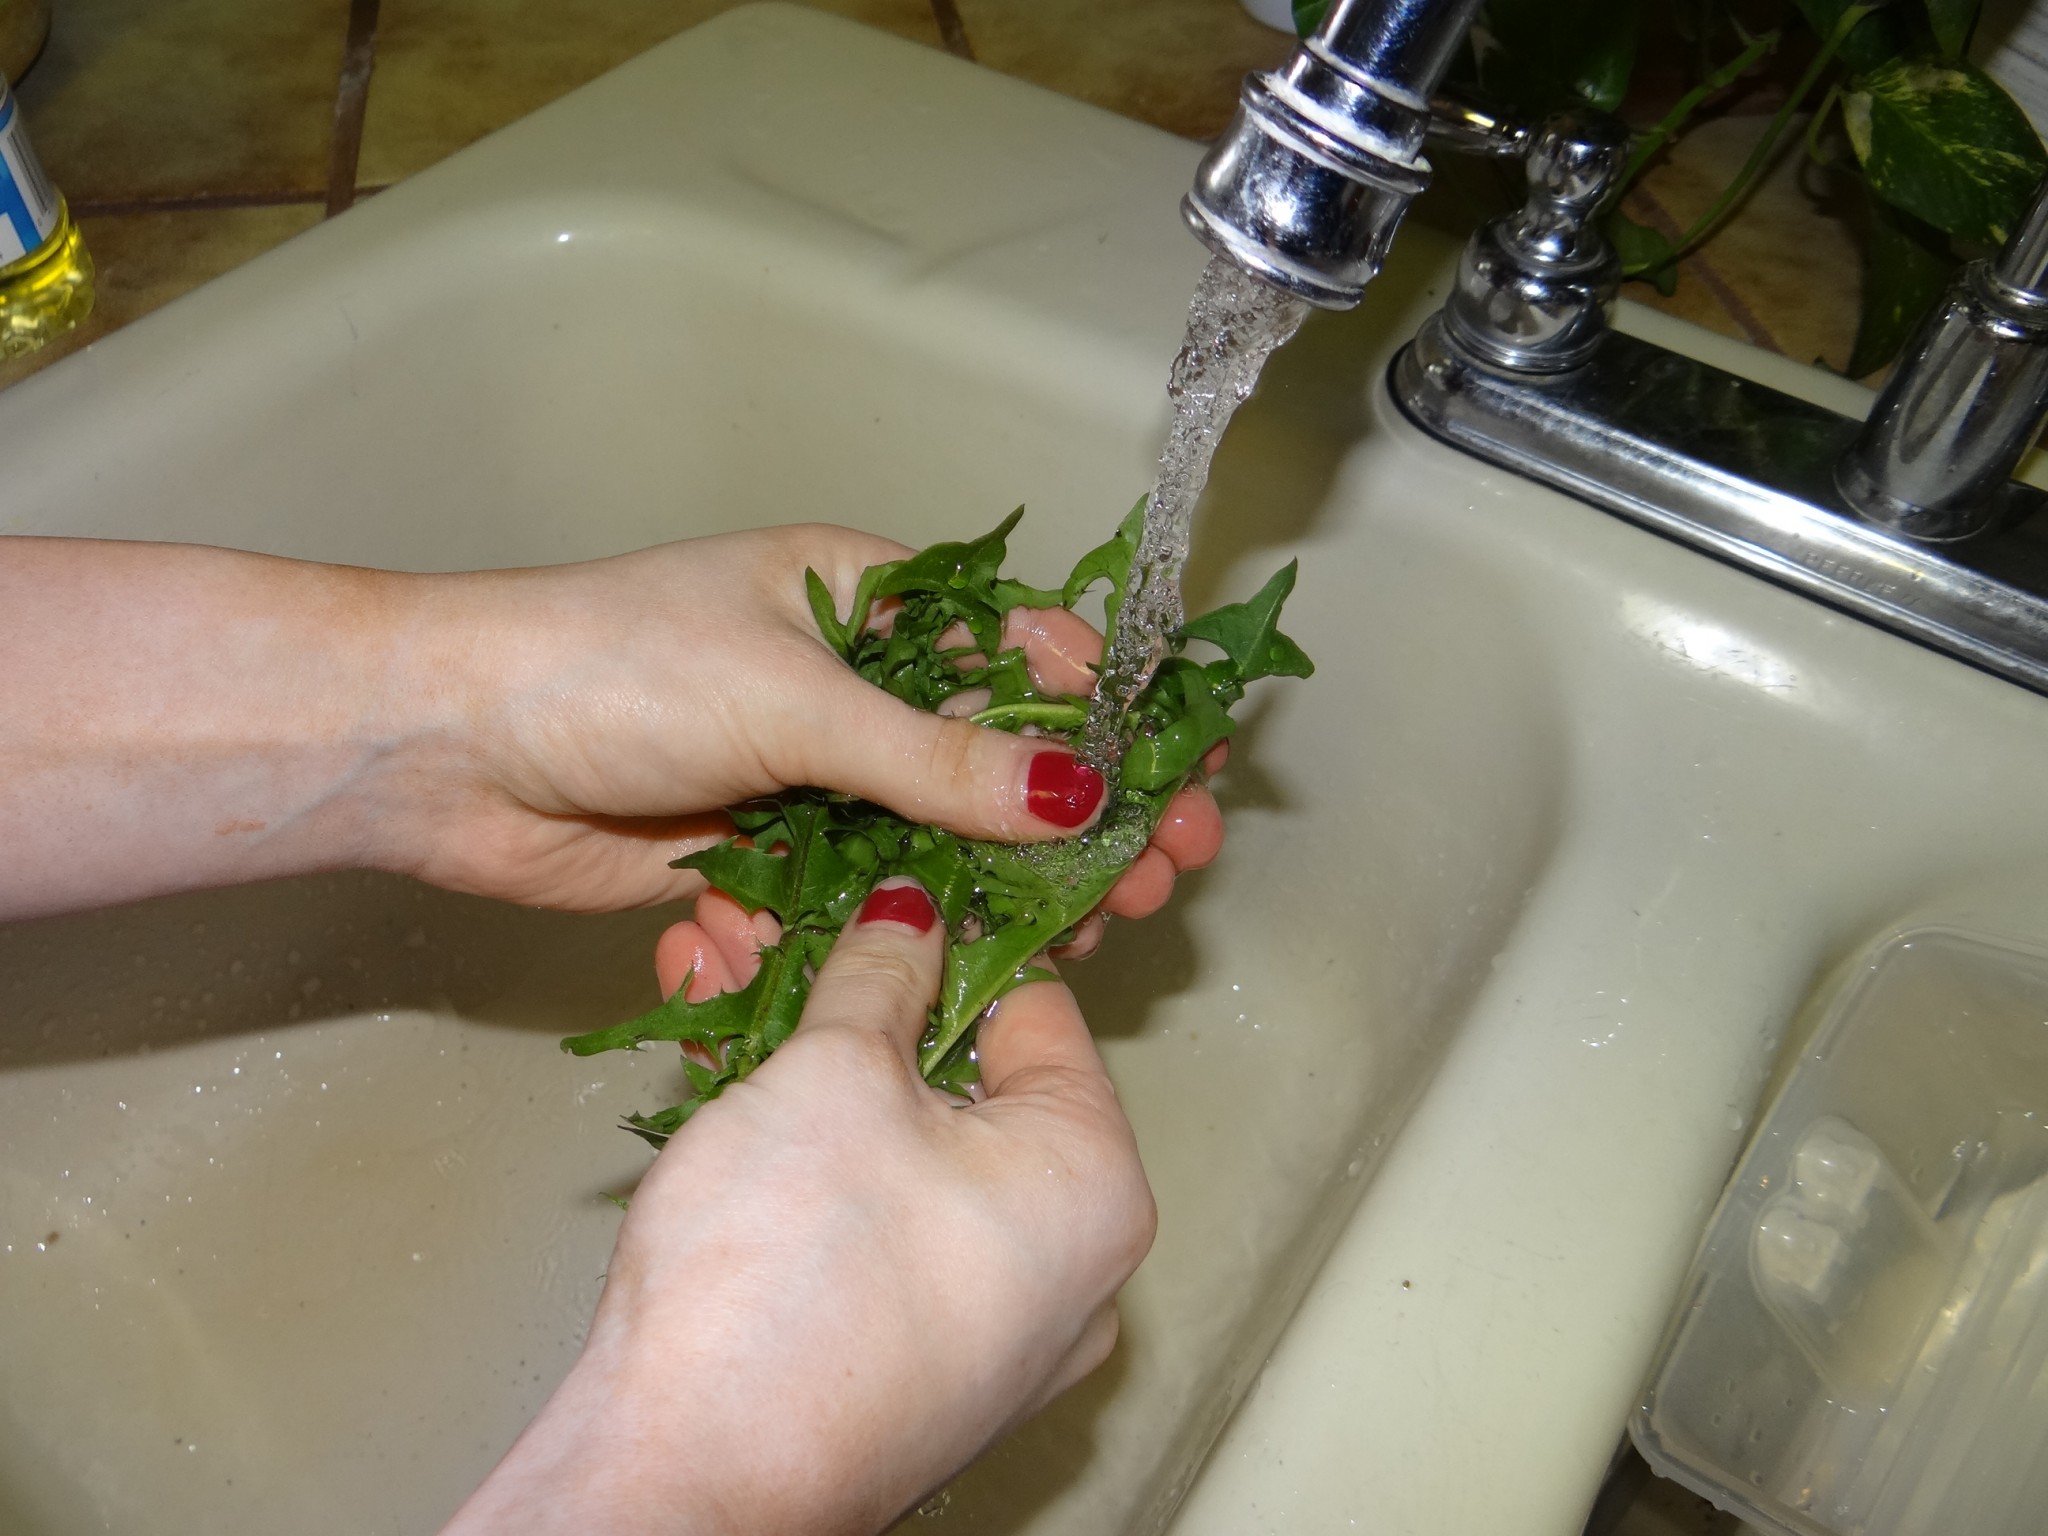 Washing common dandelion leaves. Photo by Greg Wagner.